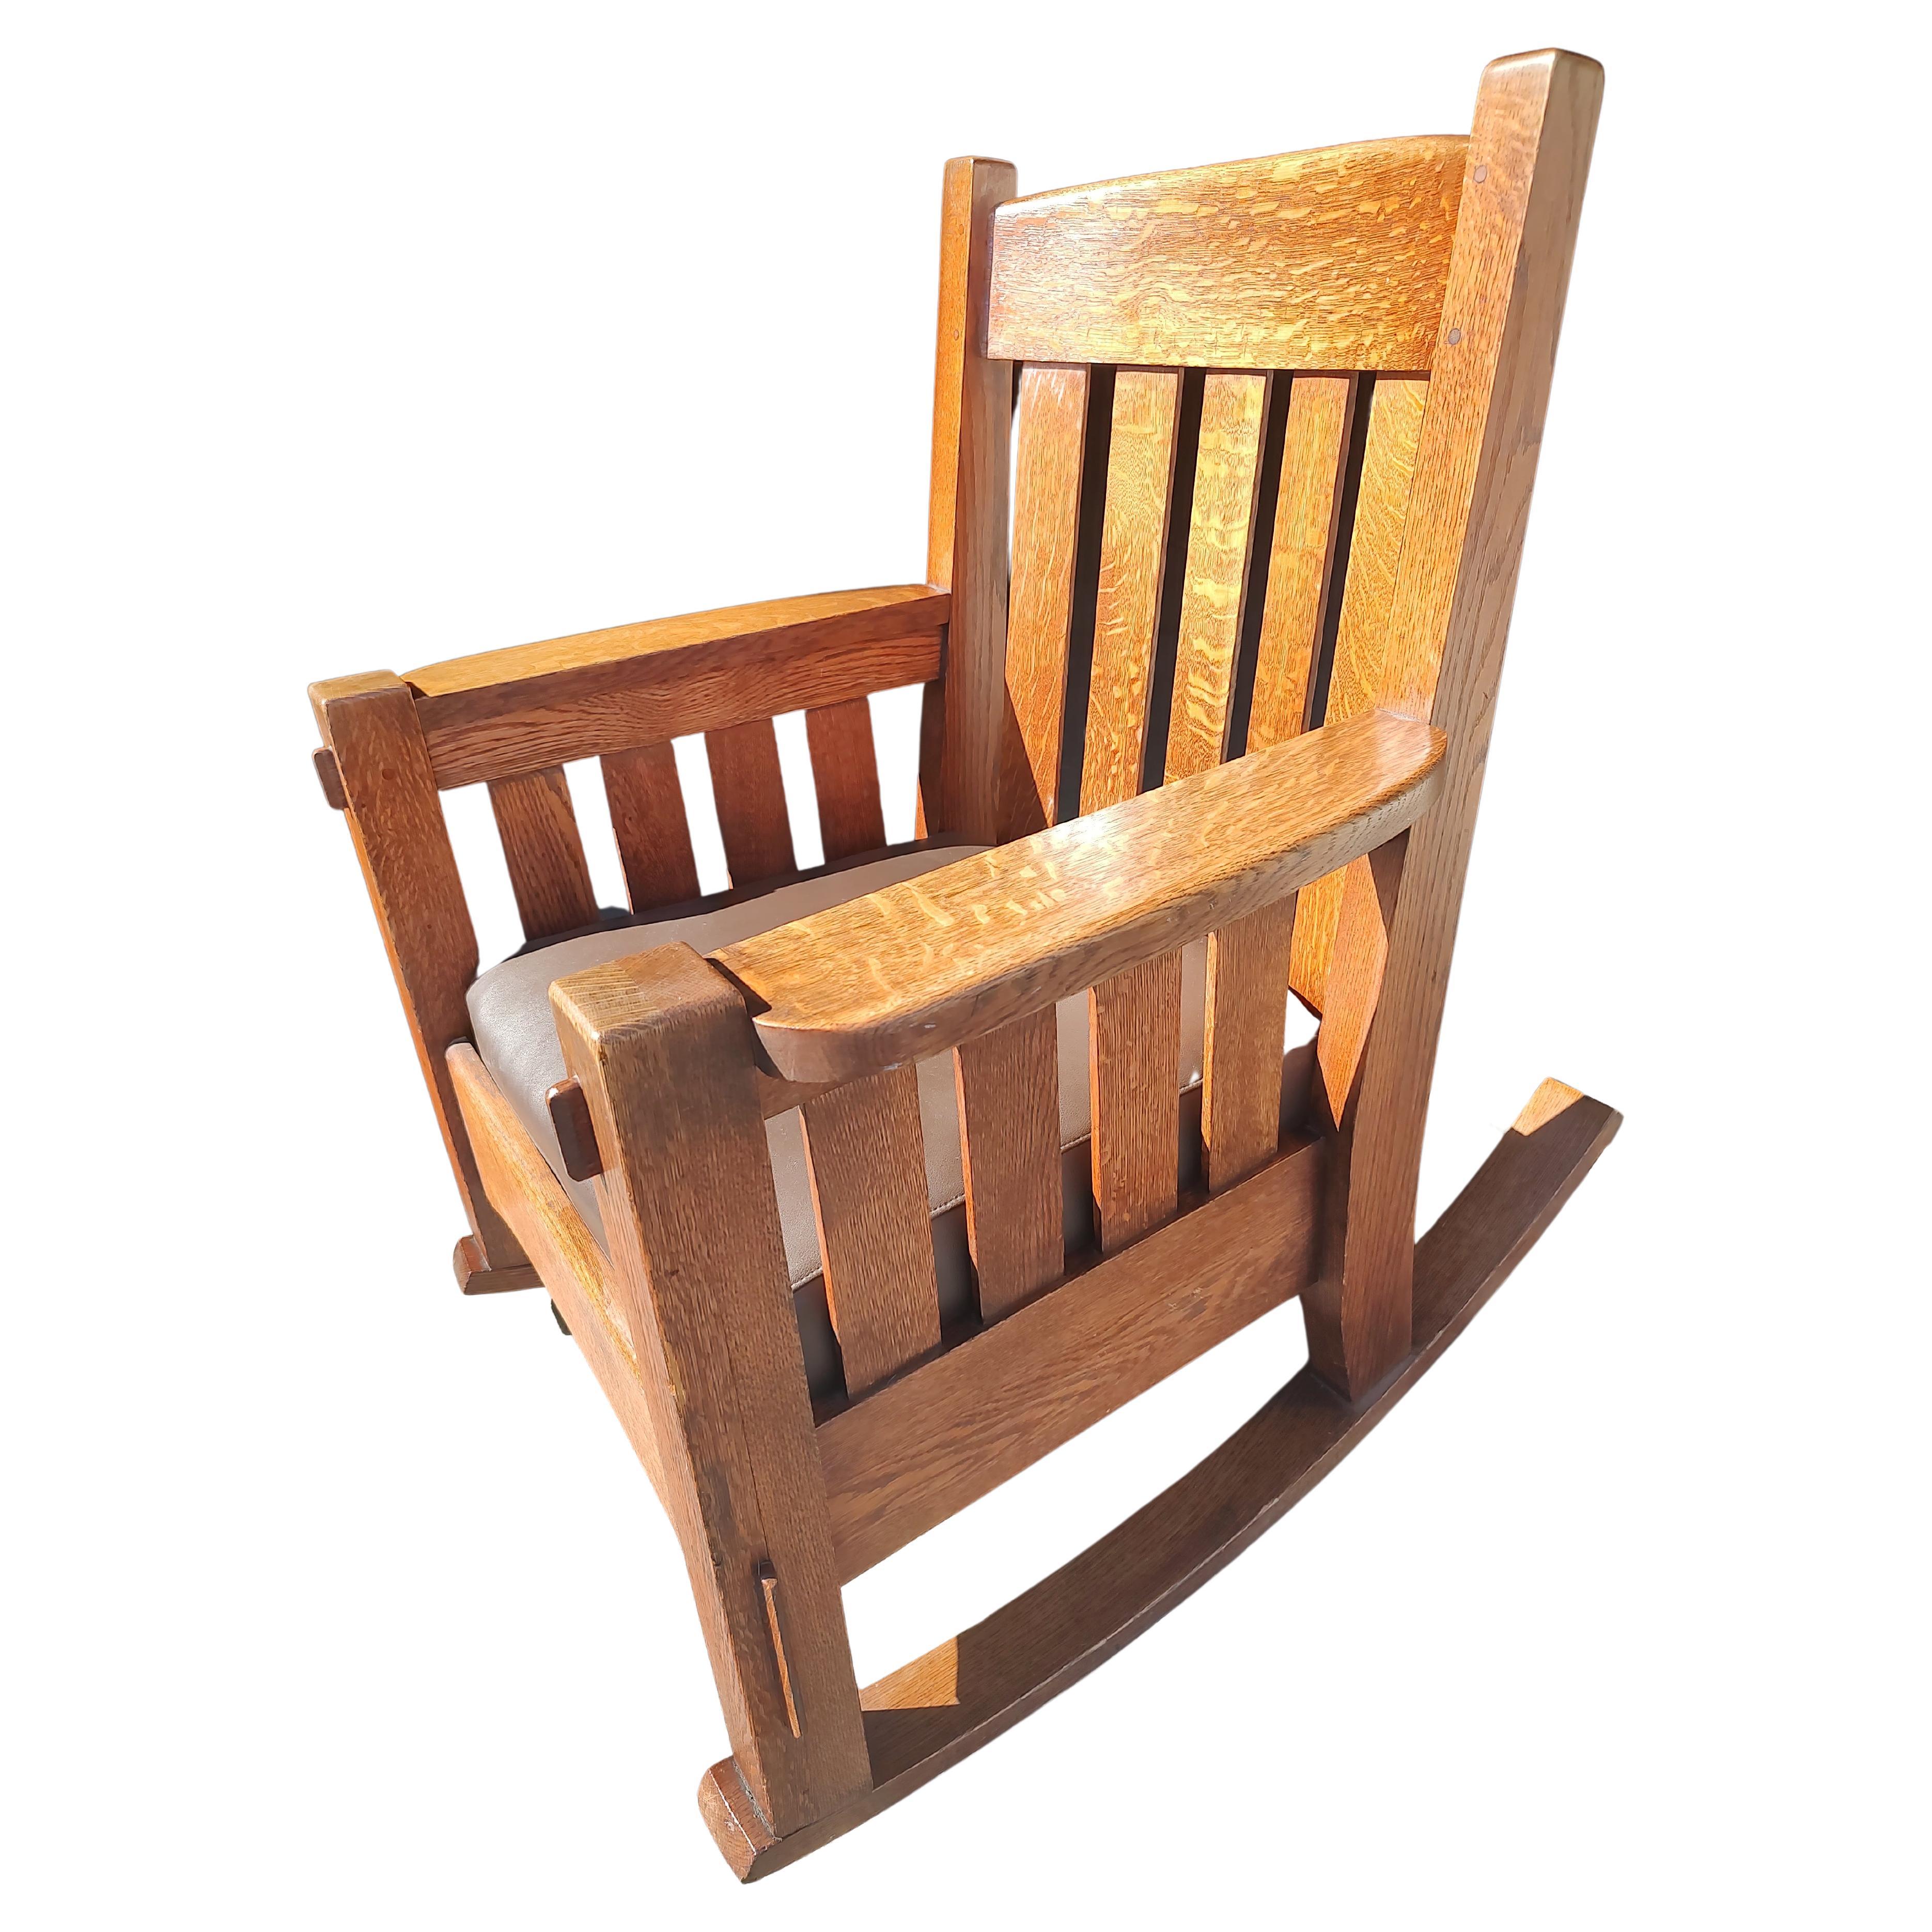 Fantastic heavy duty rocking chair by Harden furniture co. Unsigned but has all the attributes with chunky posts mortise & tenon construction, pegged etc. All quarter sawn oak with a semi new leather seat . No issues to speak of. In excellent